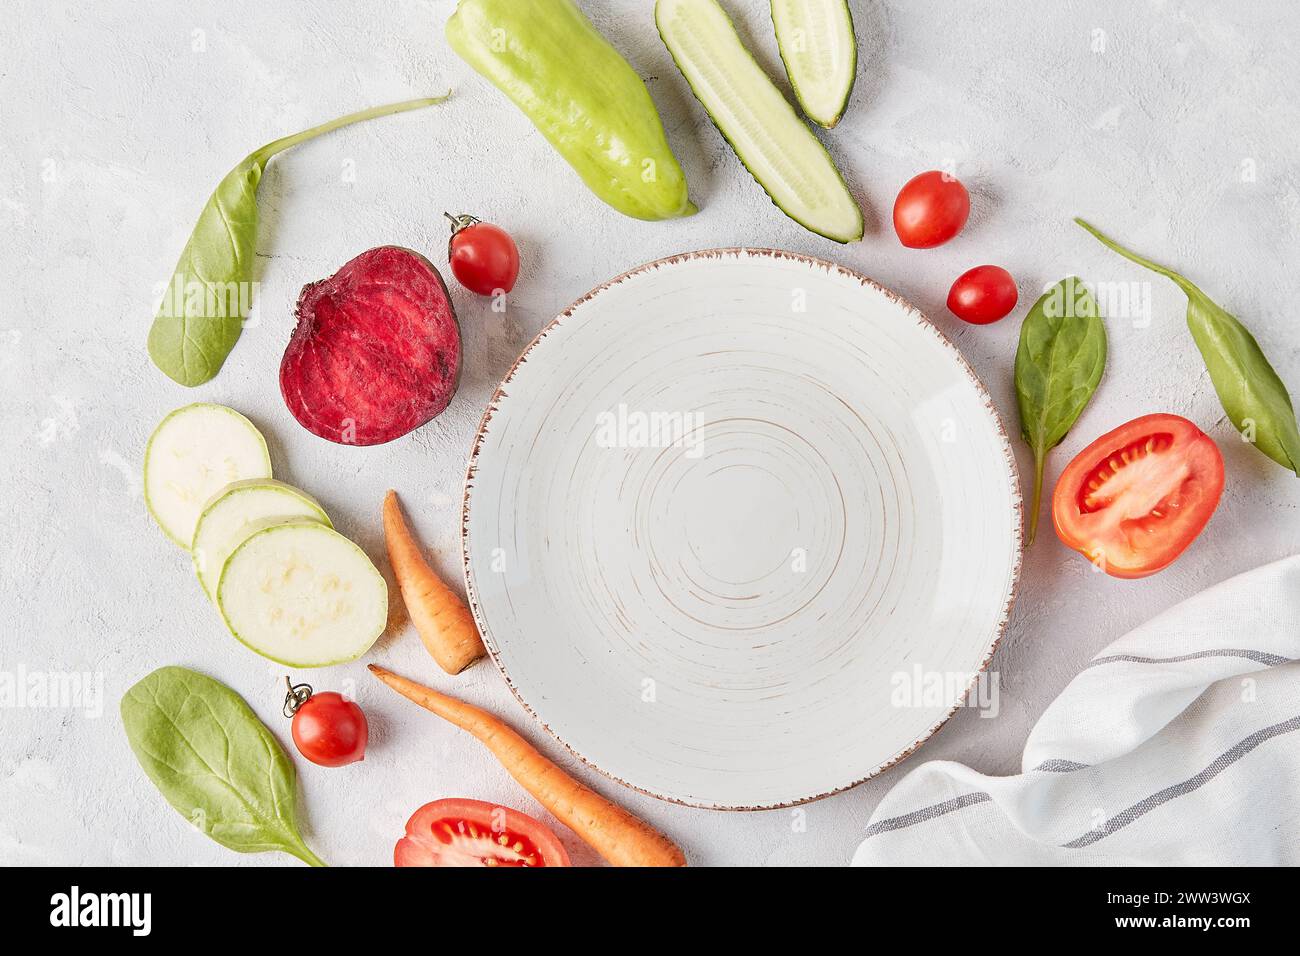 Vegan, organic, healthy food, plant-based diet concept. White plate on the table among vegetables and fruits close up. top view, copy space. Stock Photo